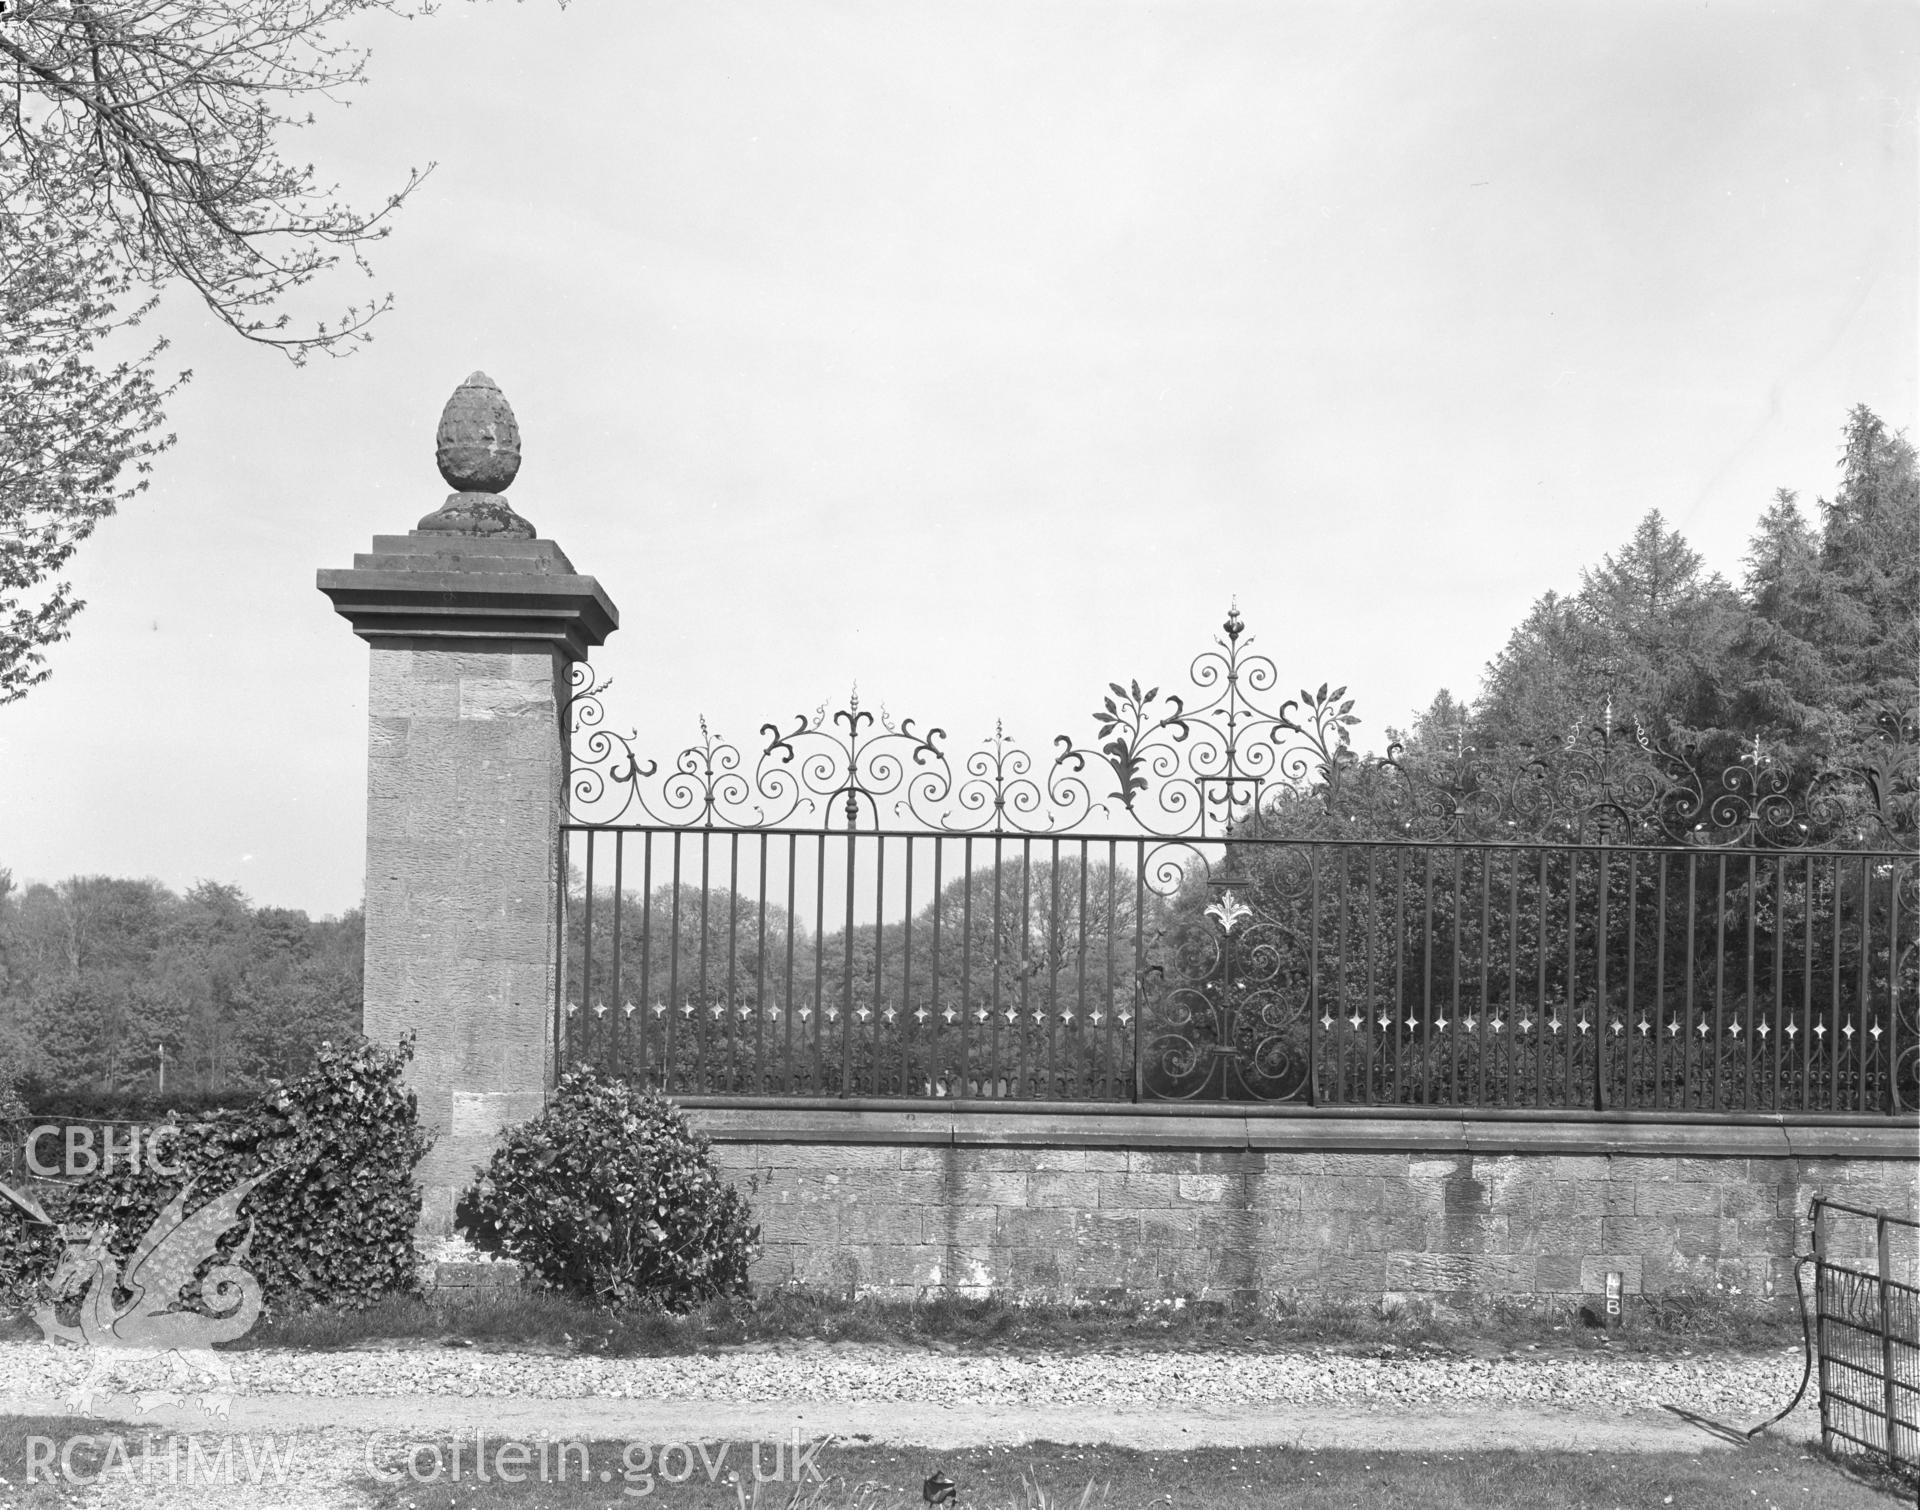 Digital copy of an acetate negative showing view of Chirk Castle gates taken by Department of Environment in 1977.